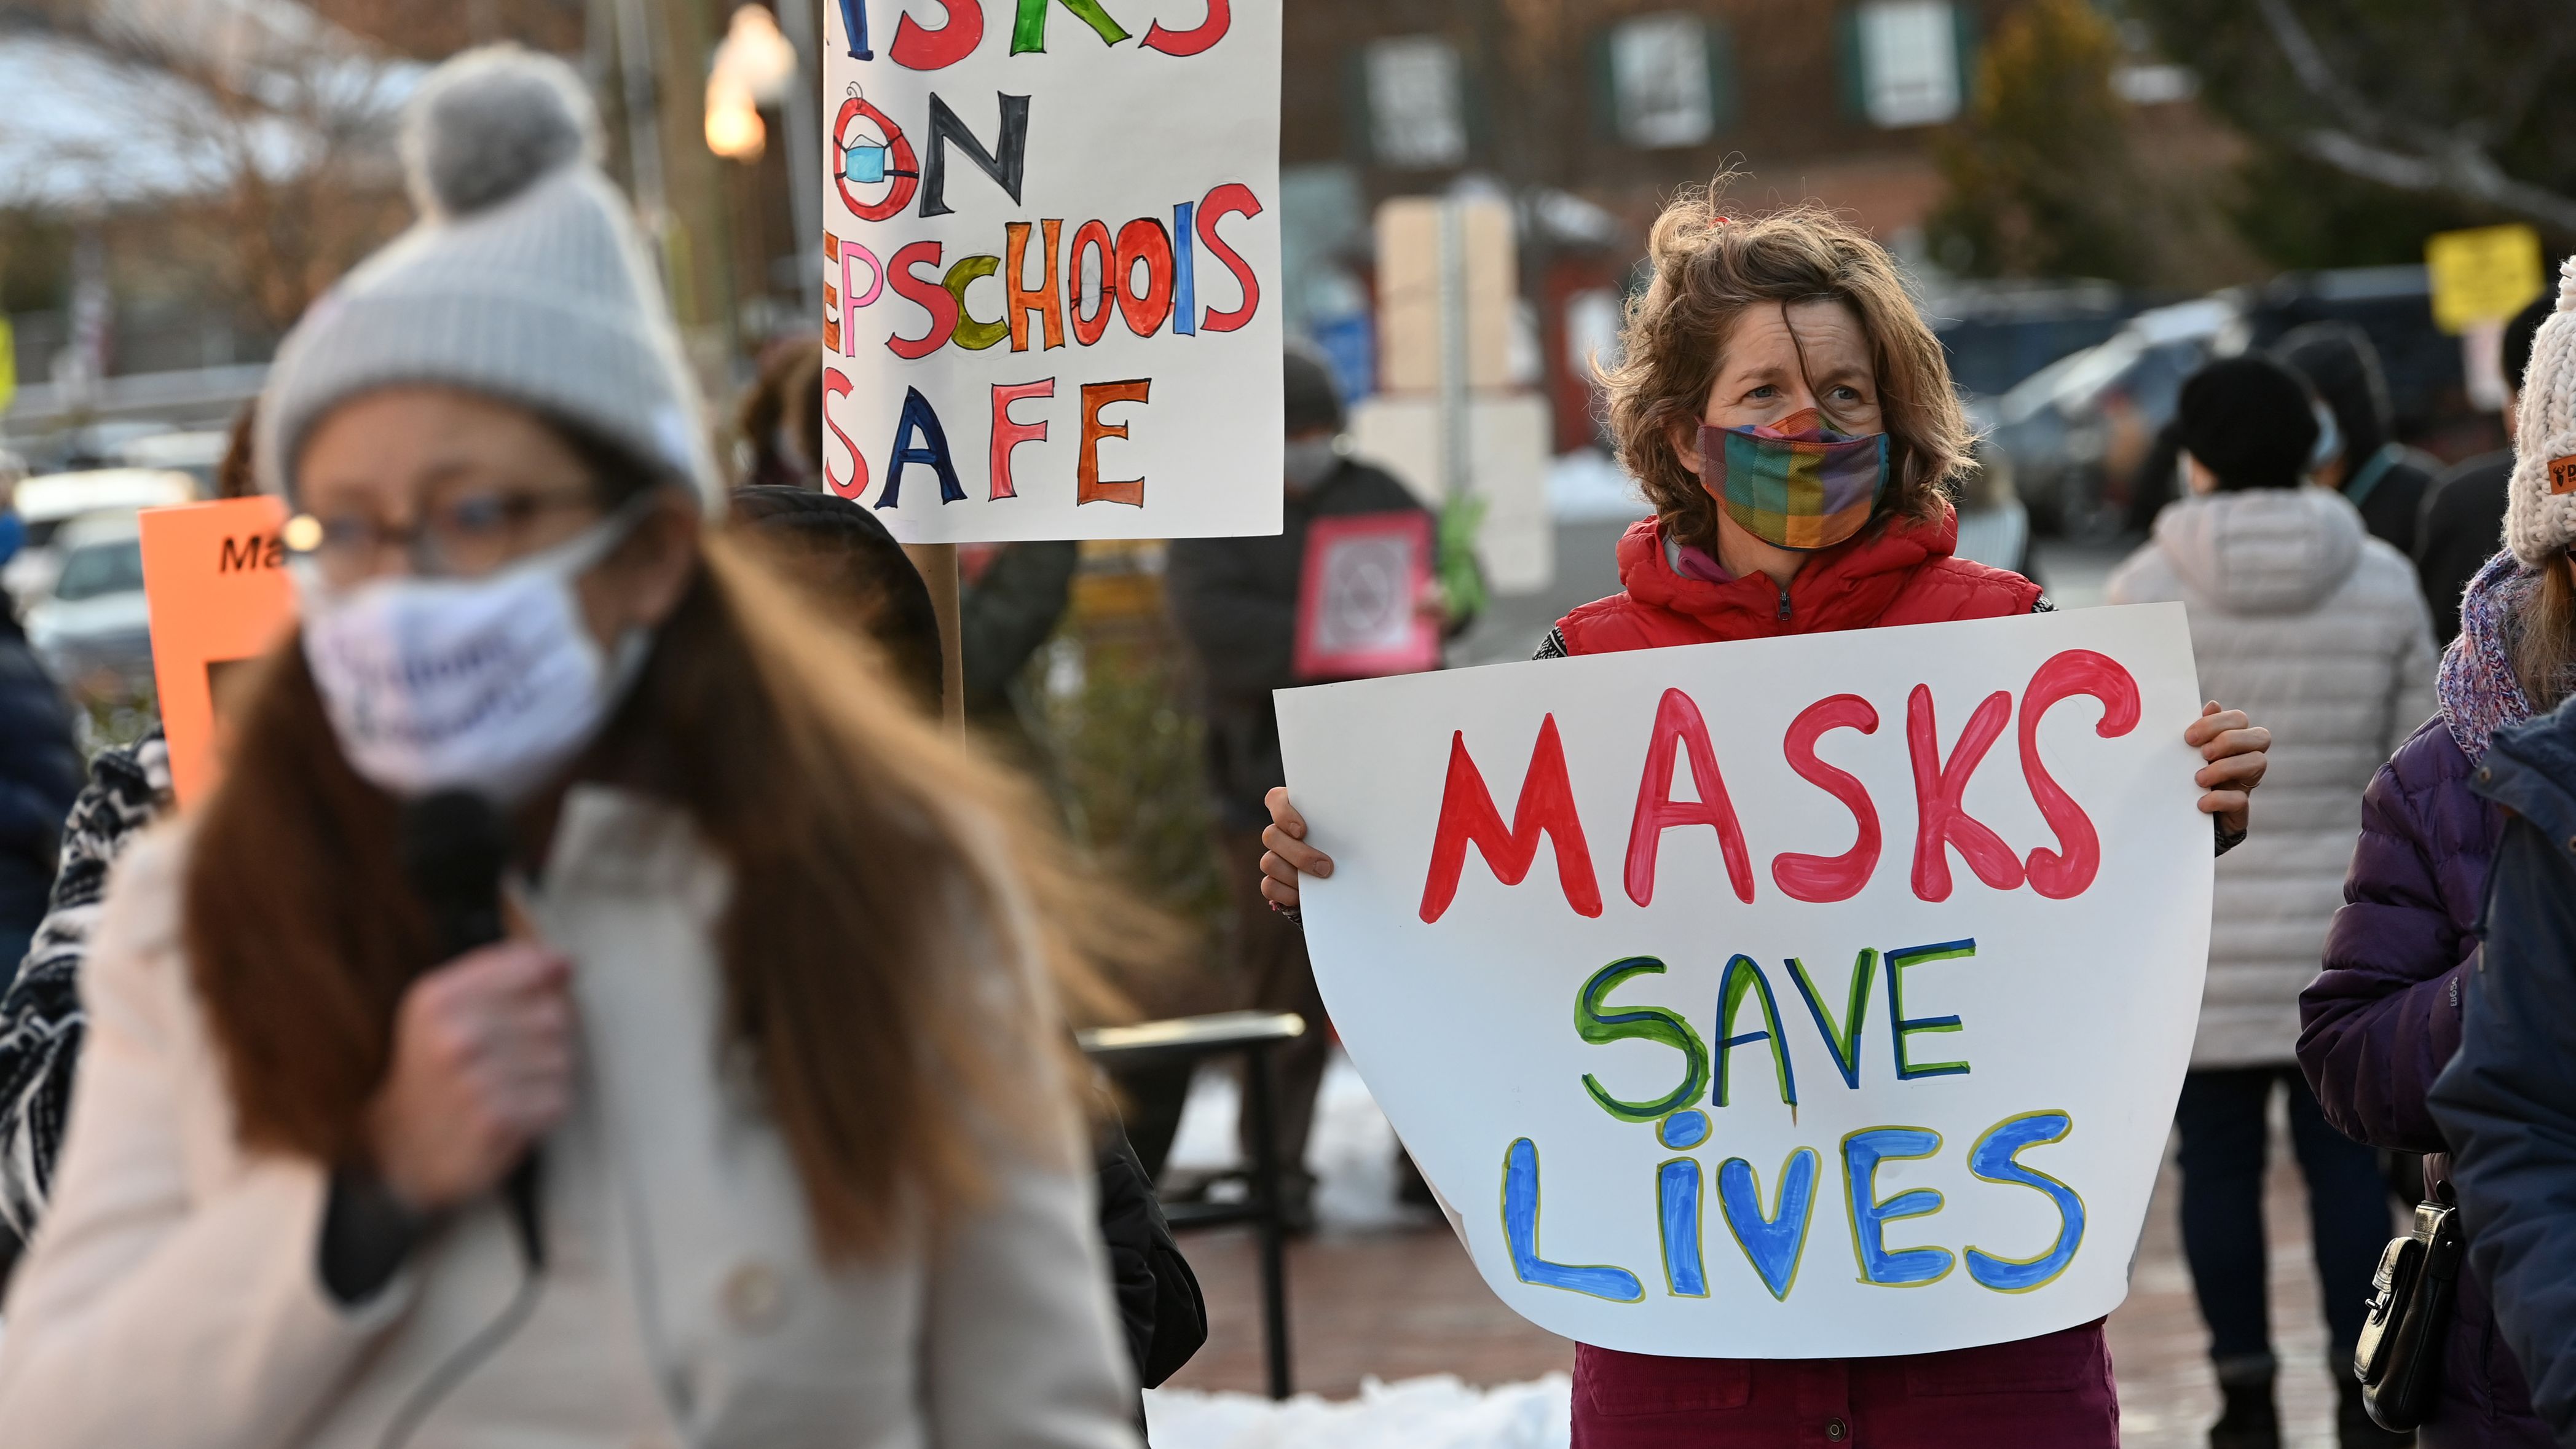  People gather in support of continuing the school mask mandate outside the Loudon County Government Center prior to a Board of Supervisors meeting on January 18, 2022 in Leesburg, Virginia. 